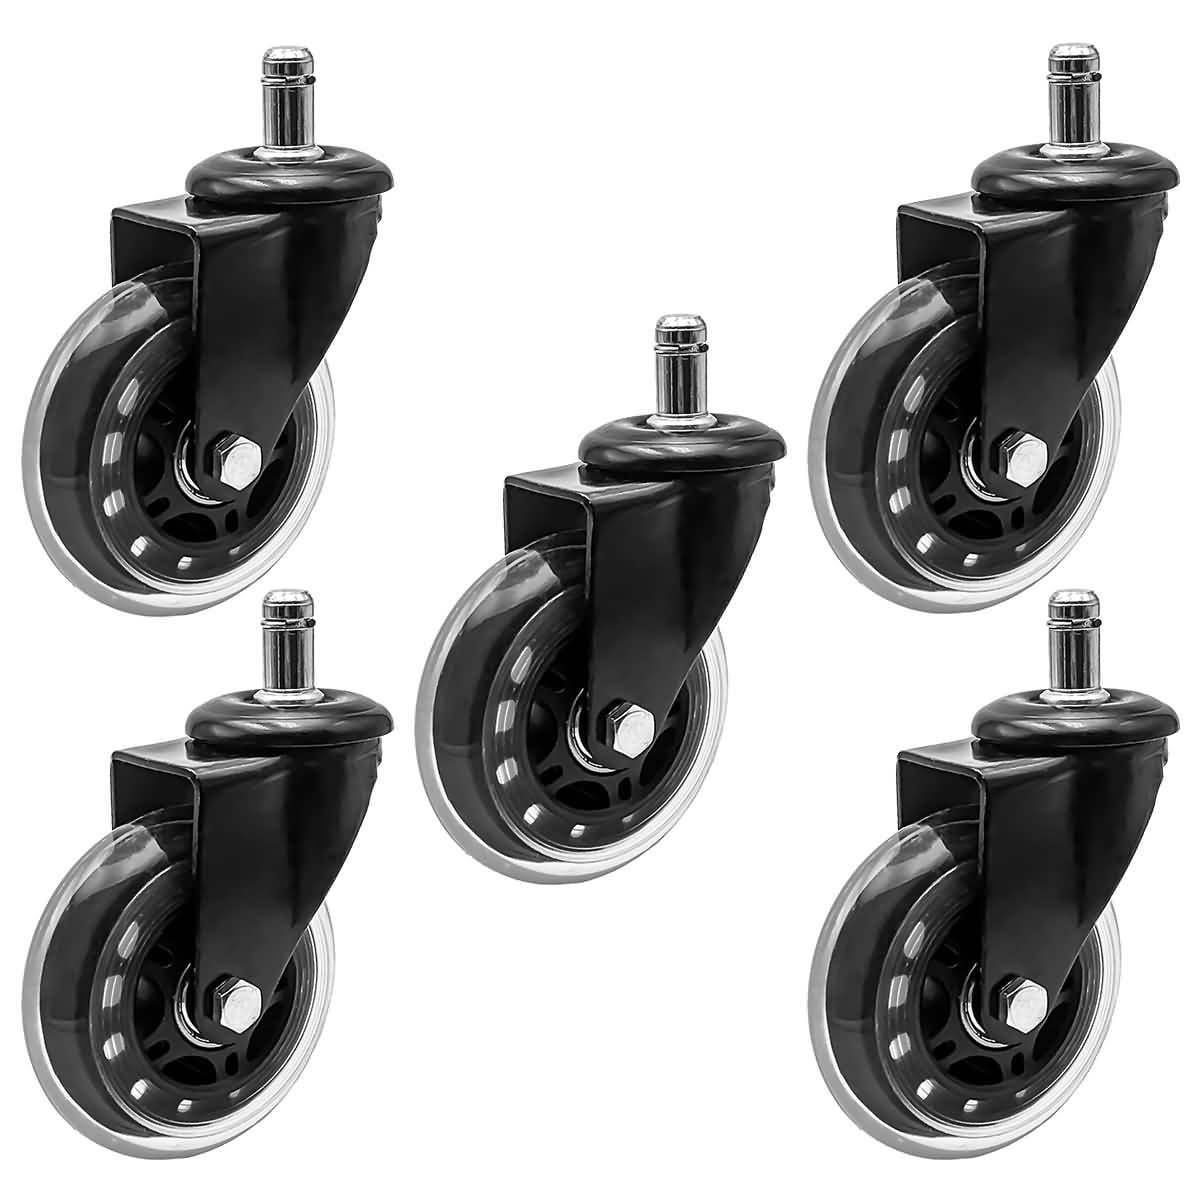 5X 3 inch Office Chair Caster Universal Wheels Set of 5 Heavy Duty Rollerblade 